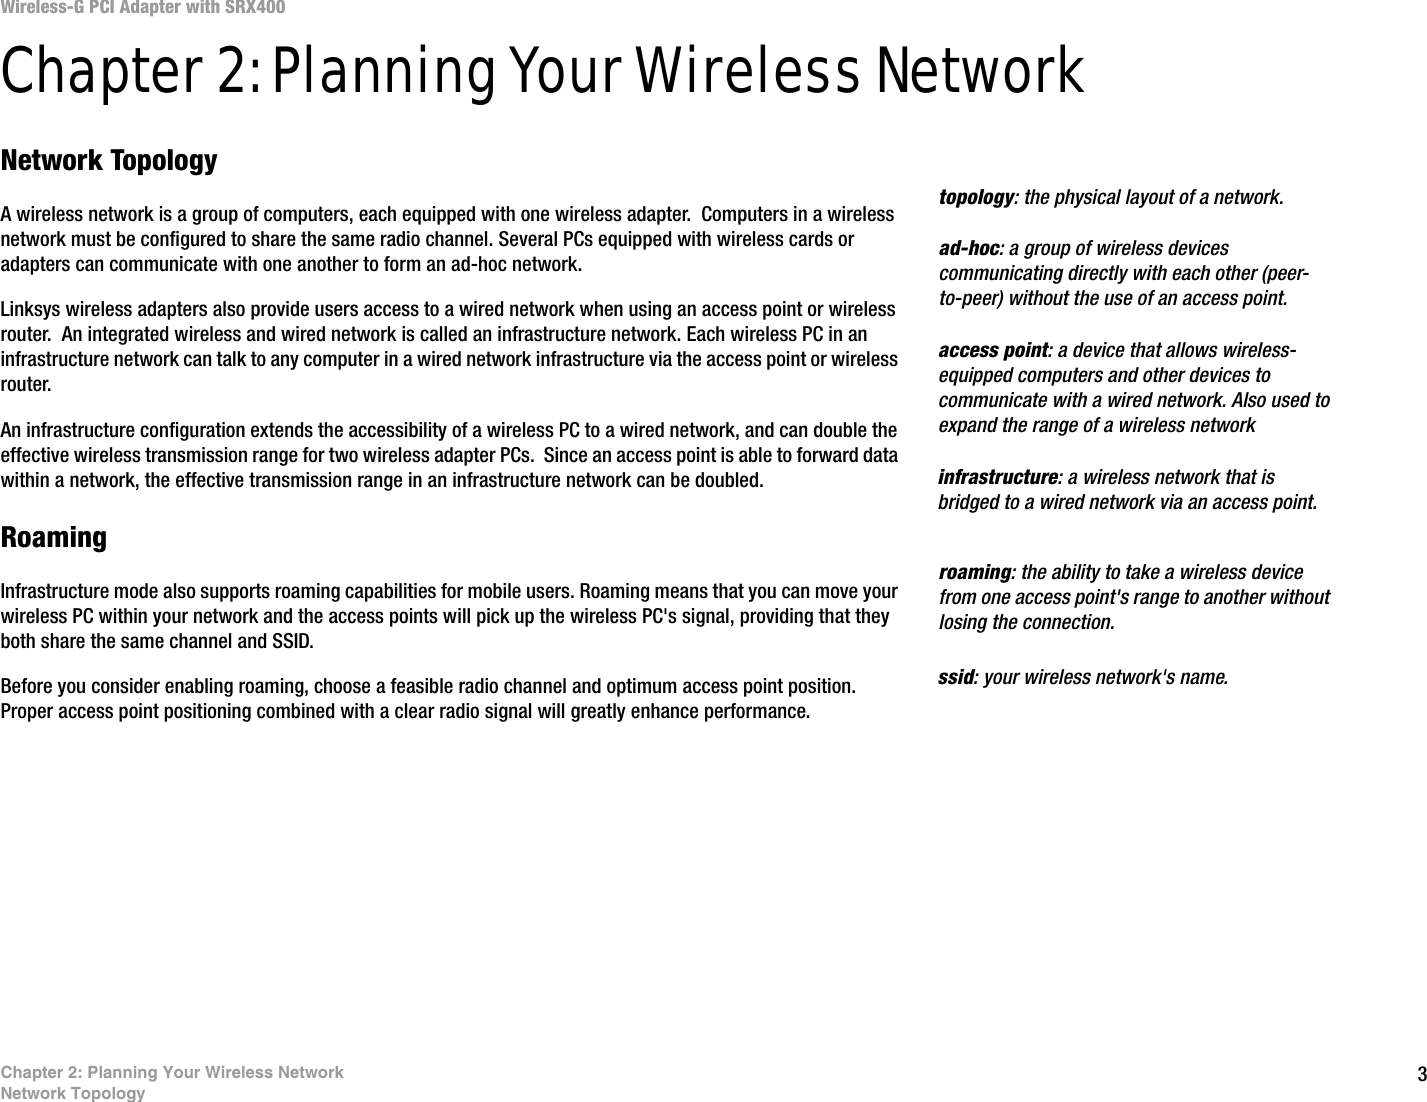 3Chapter 2: Planning Your Wireless NetworkNetwork TopologyWireless-G PCI Adapter with SRX400Chapter 2: Planning Your Wireless NetworkNetwork TopologyA wireless network is a group of computers, each equipped with one wireless adapter.  Computers in a wireless network must be configured to share the same radio channel. Several PCs equipped with wireless cards or adapters can communicate with one another to form an ad-hoc network.Linksys wireless adapters also provide users access to a wired network when using an access point or wireless router.  An integrated wireless and wired network is called an infrastructure network. Each wireless PC in an infrastructure network can talk to any computer in a wired network infrastructure via the access point or wireless router.An infrastructure configuration extends the accessibility of a wireless PC to a wired network, and can double the effective wireless transmission range for two wireless adapter PCs.  Since an access point is able to forward data within a network, the effective transmission range in an infrastructure network can be doubled.RoamingInfrastructure mode also supports roaming capabilities for mobile users. Roaming means that you can move your wireless PC within your network and the access points will pick up the wireless PC&apos;s signal, providing that they both share the same channel and SSID.Before you consider enabling roaming, choose a feasible radio channel and optimum access point position. Proper access point positioning combined with a clear radio signal will greatly enhance performance.infrastructure: a wireless network that is bridged to a wired network via an access point.ad-hoc: a group of wireless devices communicating directly with each other (peer-to-peer) without the use of an access point.roaming: the ability to take a wireless device from one access point&apos;s range to another without losing the connection.ssid: your wireless network&apos;s name.topology: the physical layout of a network.access point: a device that allows wireless-equipped computers and other devices to communicate with a wired network. Also used to expand the range of a wireless network